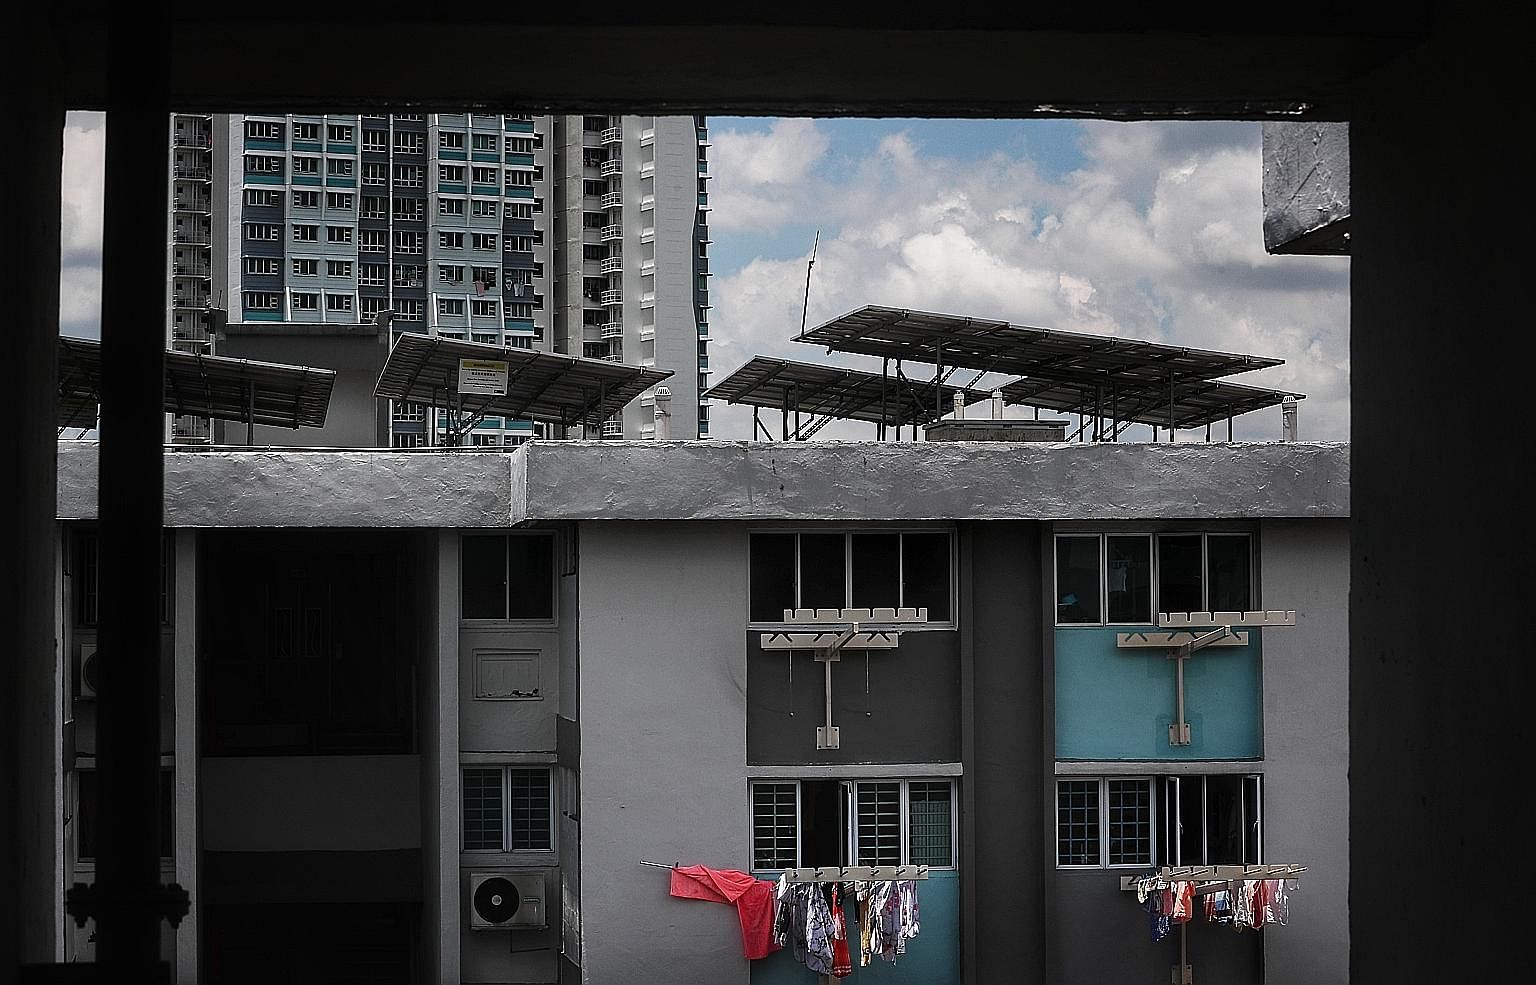 Solar panels on the rooftops of Housing Board blocks in Ang Mo Kio. The Government's green vision includes dramatically increasing solar energy generation and electric vehicle use, reducing household waste, making buildings much more energy-efficient